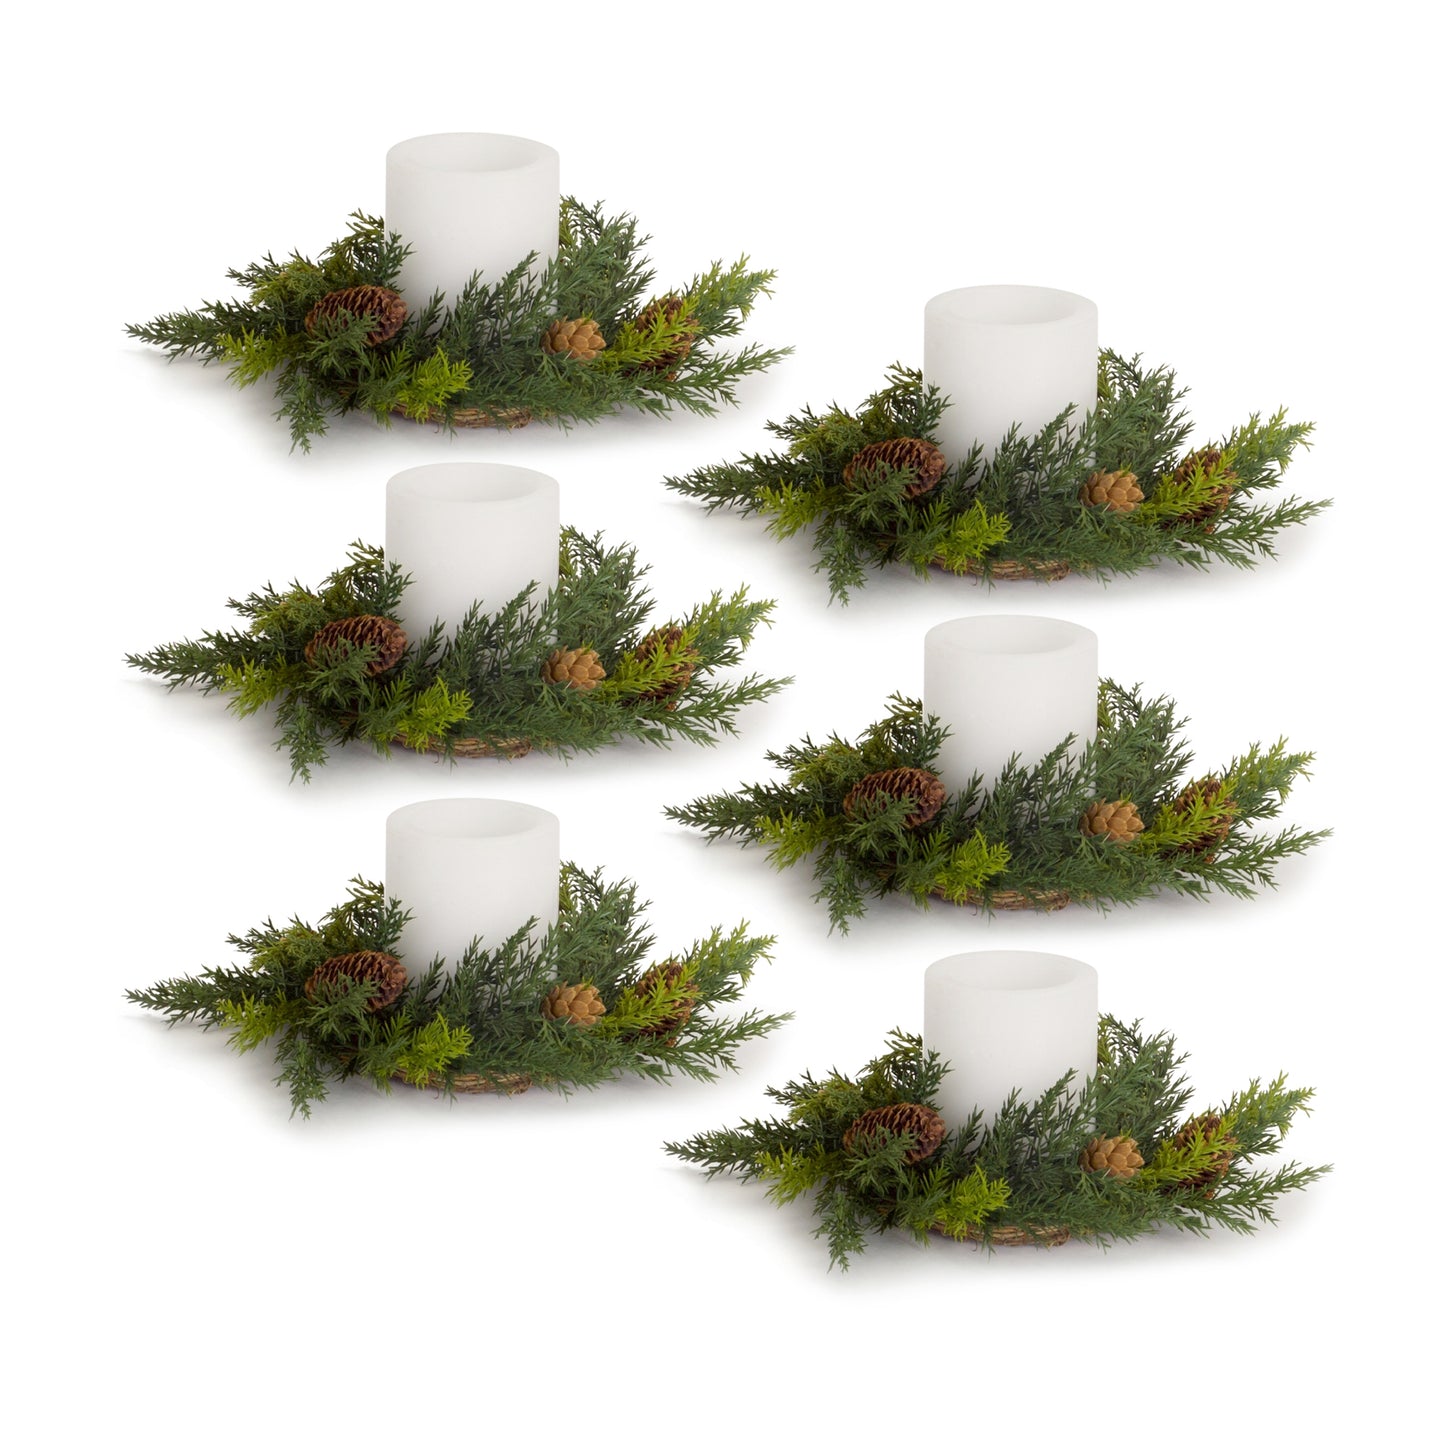 Arborvitae Foliage Candle Ring with Pinecone Accents (Set of 6)